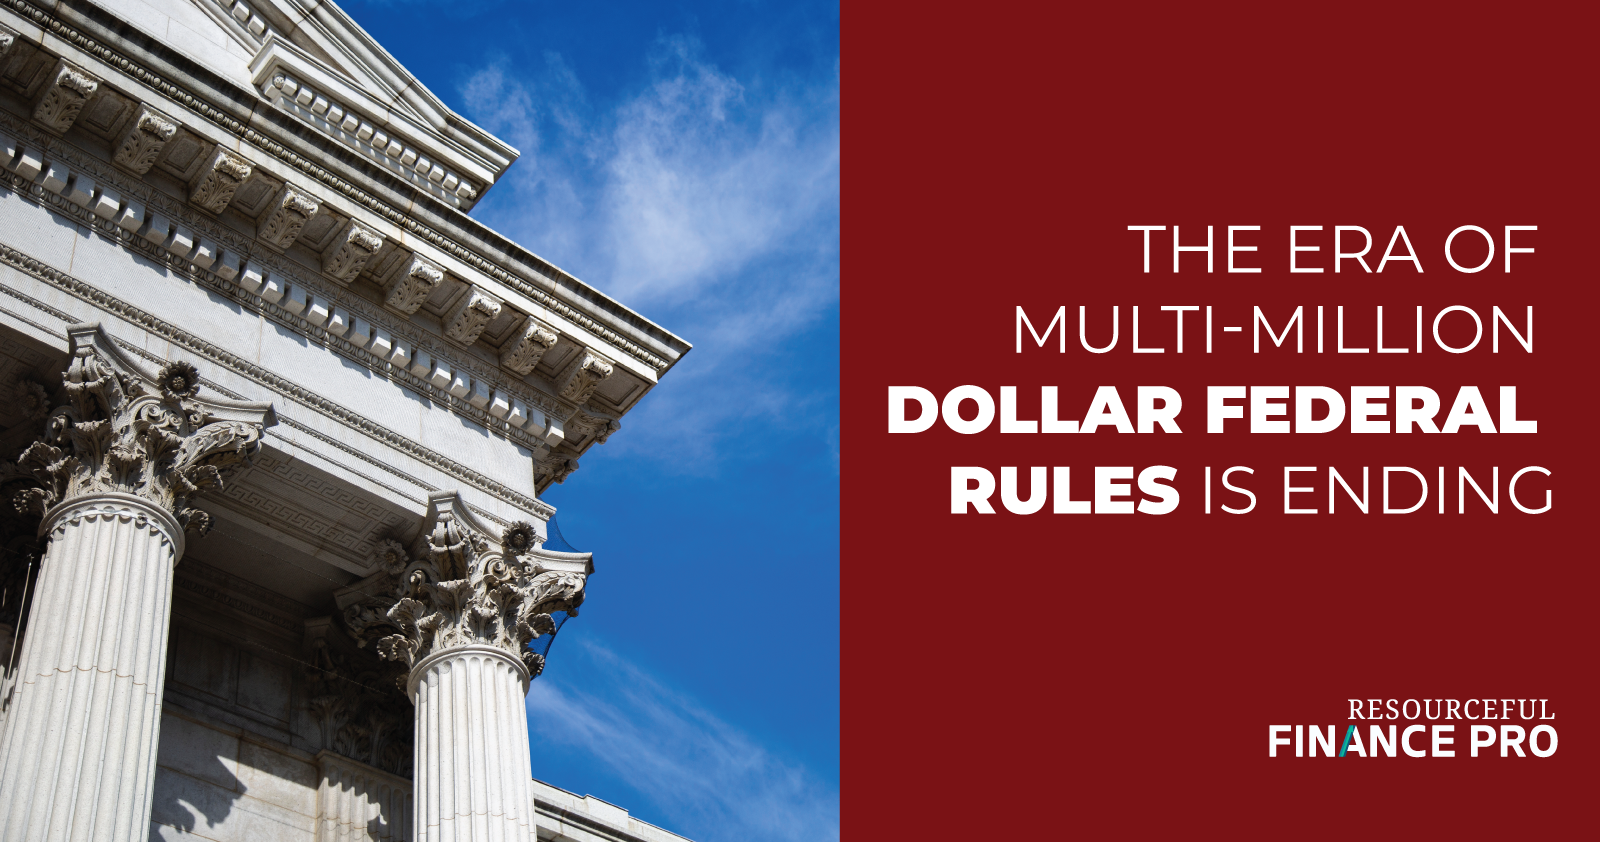 The era of multi-million dollar federal rules is ending